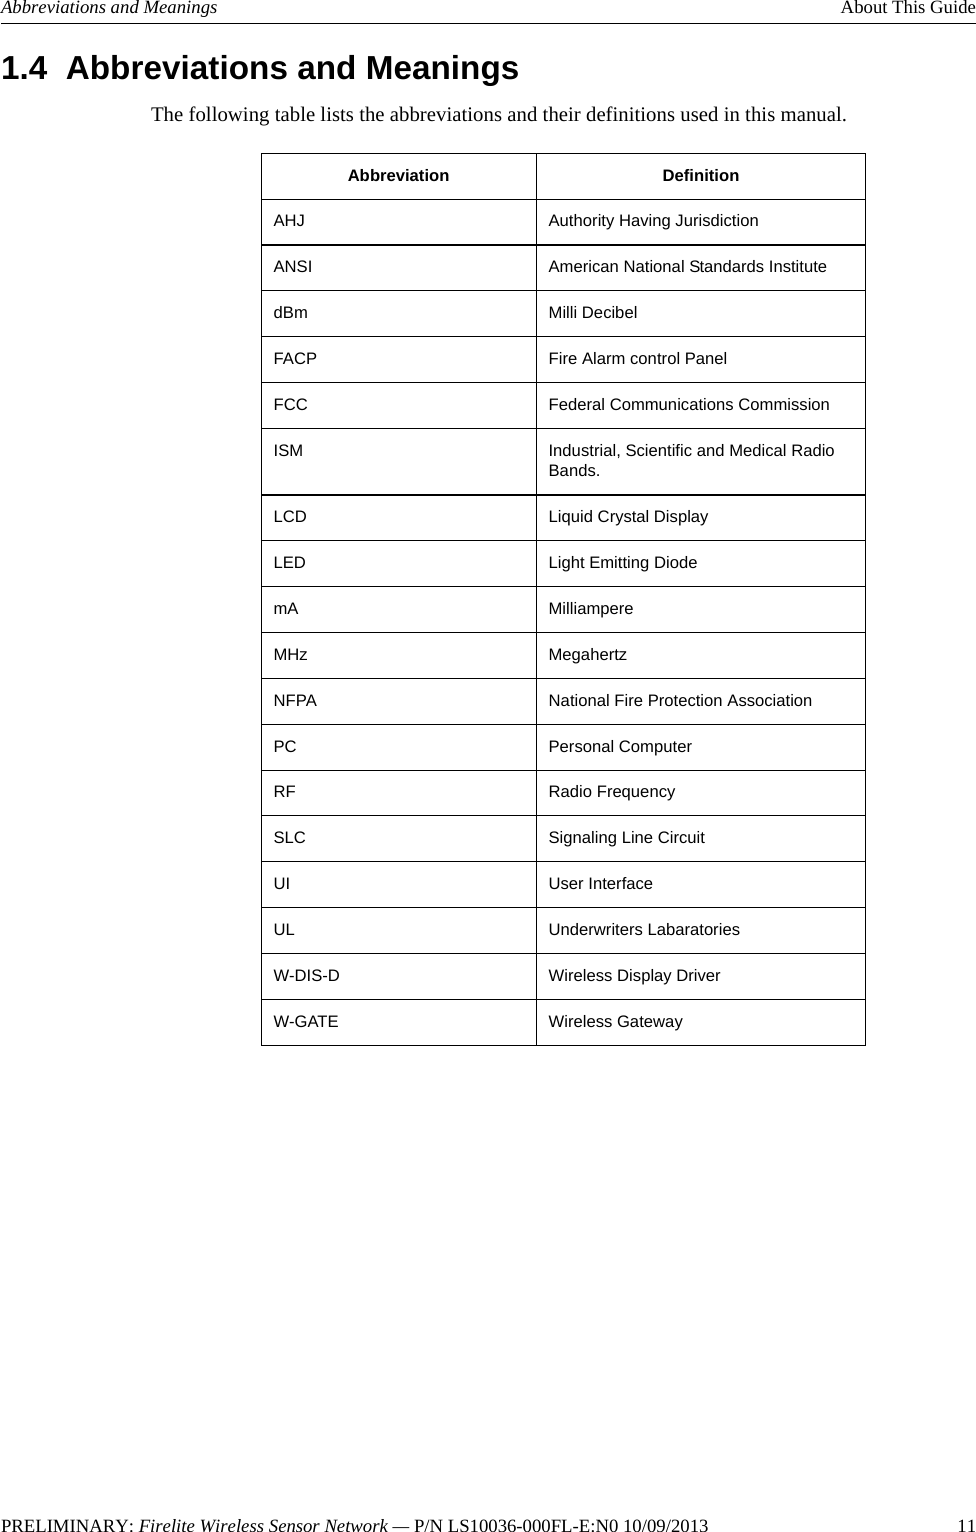 PRELIMINARY: Firelite Wireless Sensor Network — P/N LS10036-000FL-E:N0 10/09/2013   11Abbreviations and Meanings About This Guide1.4  Abbreviations and MeaningsThe following table lists the abbreviations and their definitions used in this manual.Abbreviation DefinitionAHJ Authority Having JurisdictionANSI American National Standards InstitutedBm Milli DecibelFACP Fire Alarm control PanelFCC Federal Communications CommissionISM Industrial, Scientific and Medical RadioBands.LCD Liquid Crystal DisplayLED Light Emitting DiodemA MilliampereMHz MegahertzNFPA National Fire Protection AssociationPC Personal ComputerRF Radio FrequencySLC Signaling Line CircuitUI User InterfaceUL Underwriters LabaratoriesW-DIS-D Wireless Display DriverW-GATE Wireless Gateway